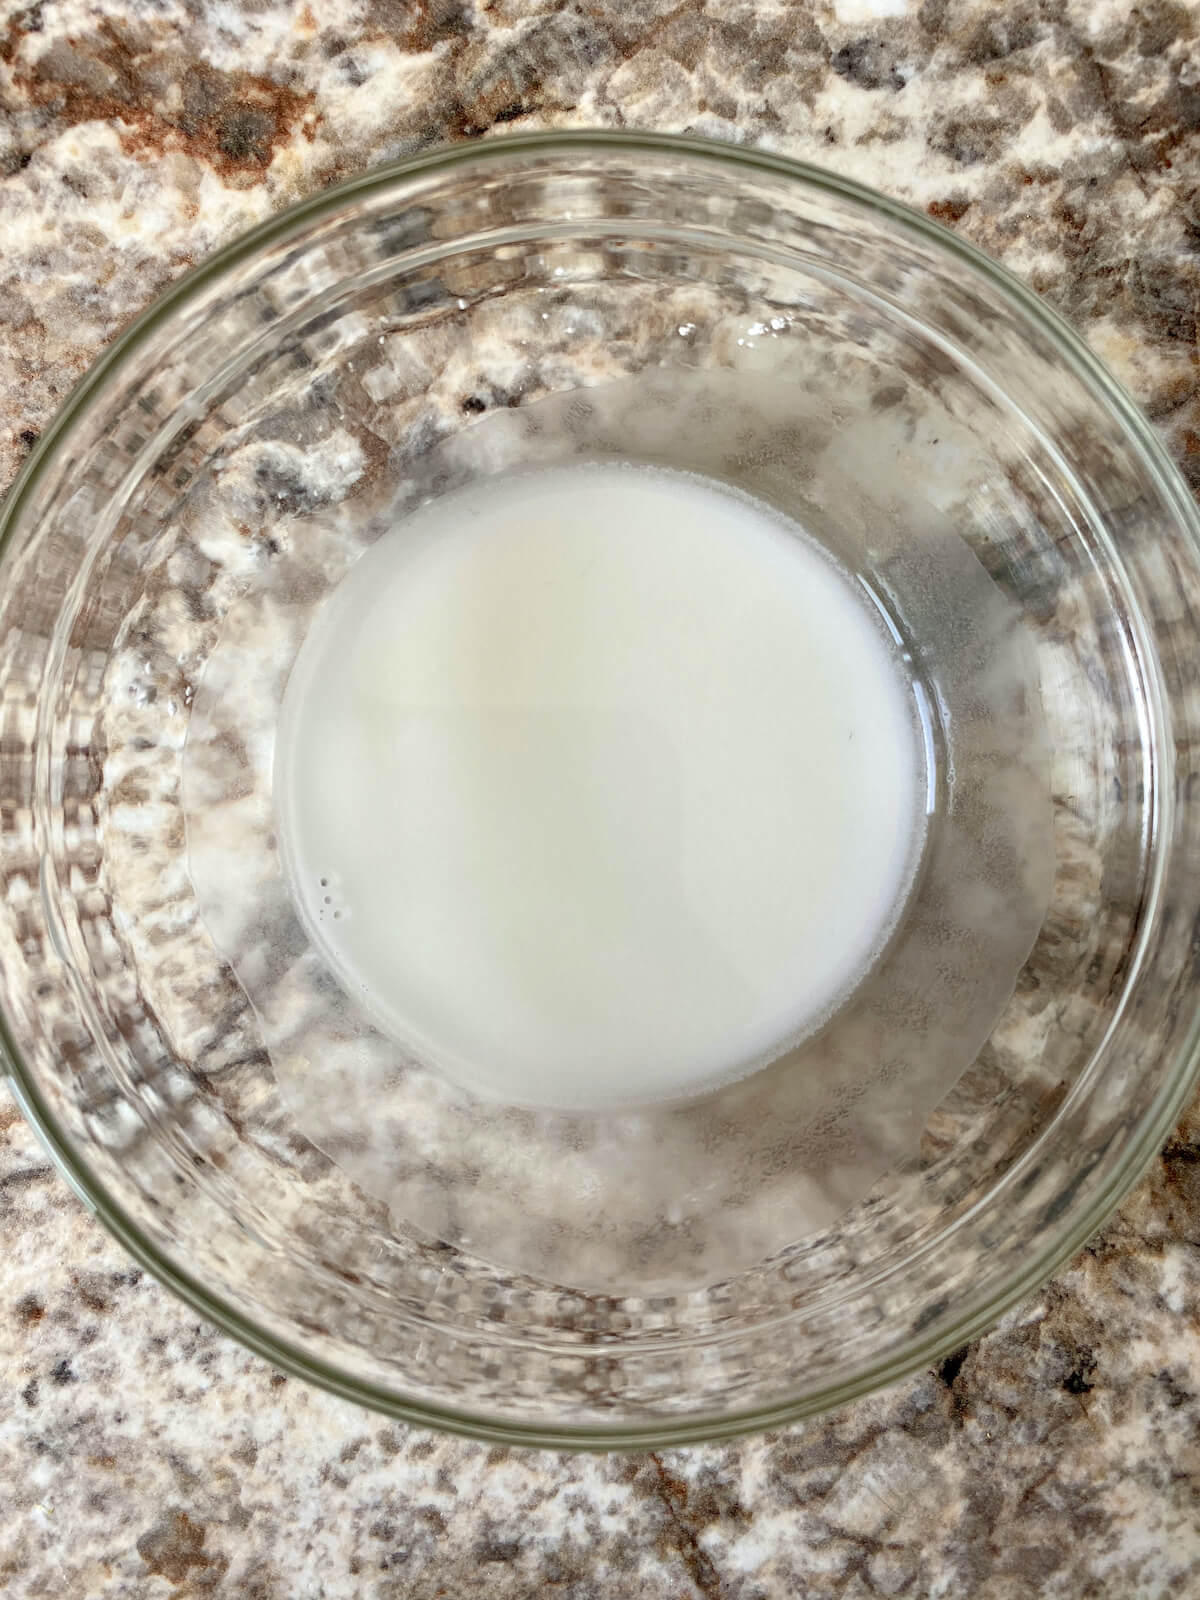 Cornstarch and water whisked together in a small bowl to make a cornstarch slurry.